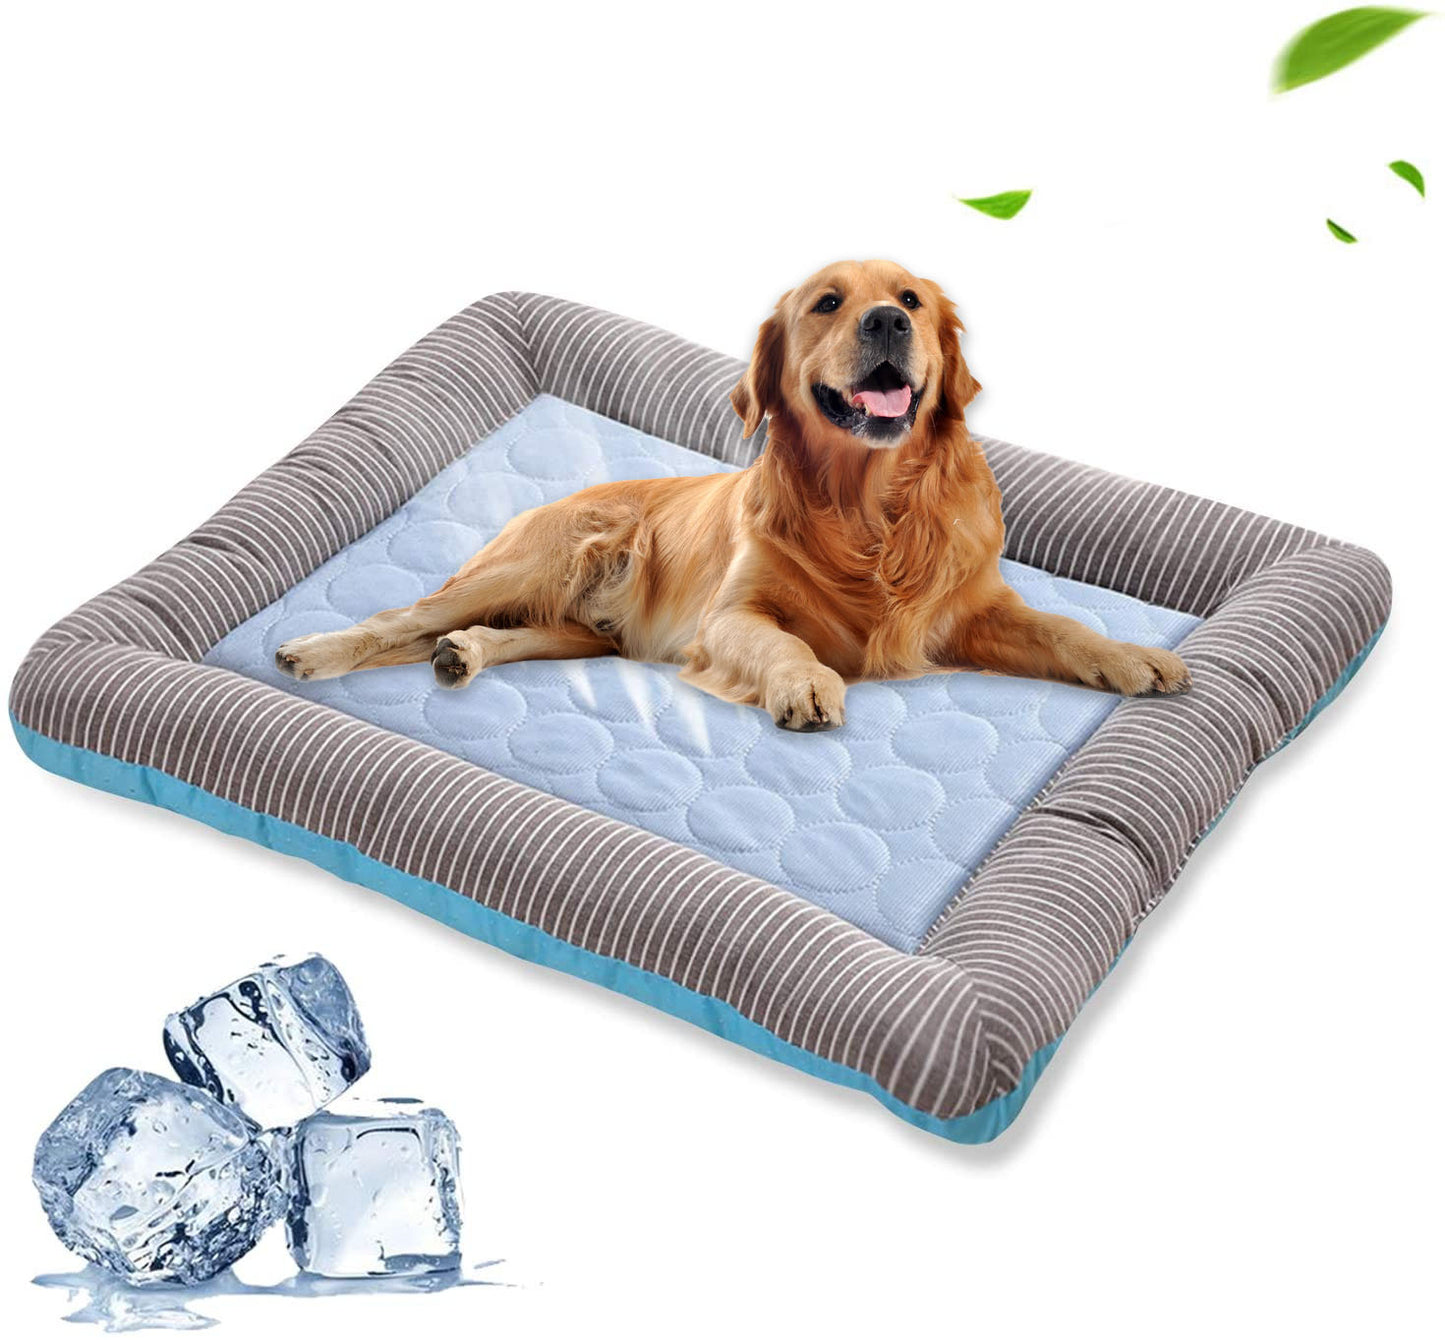 Supreme Cooling Pet Pad - Portable and Washable Summer Mat for Dogs and Cats in Blue and Pink